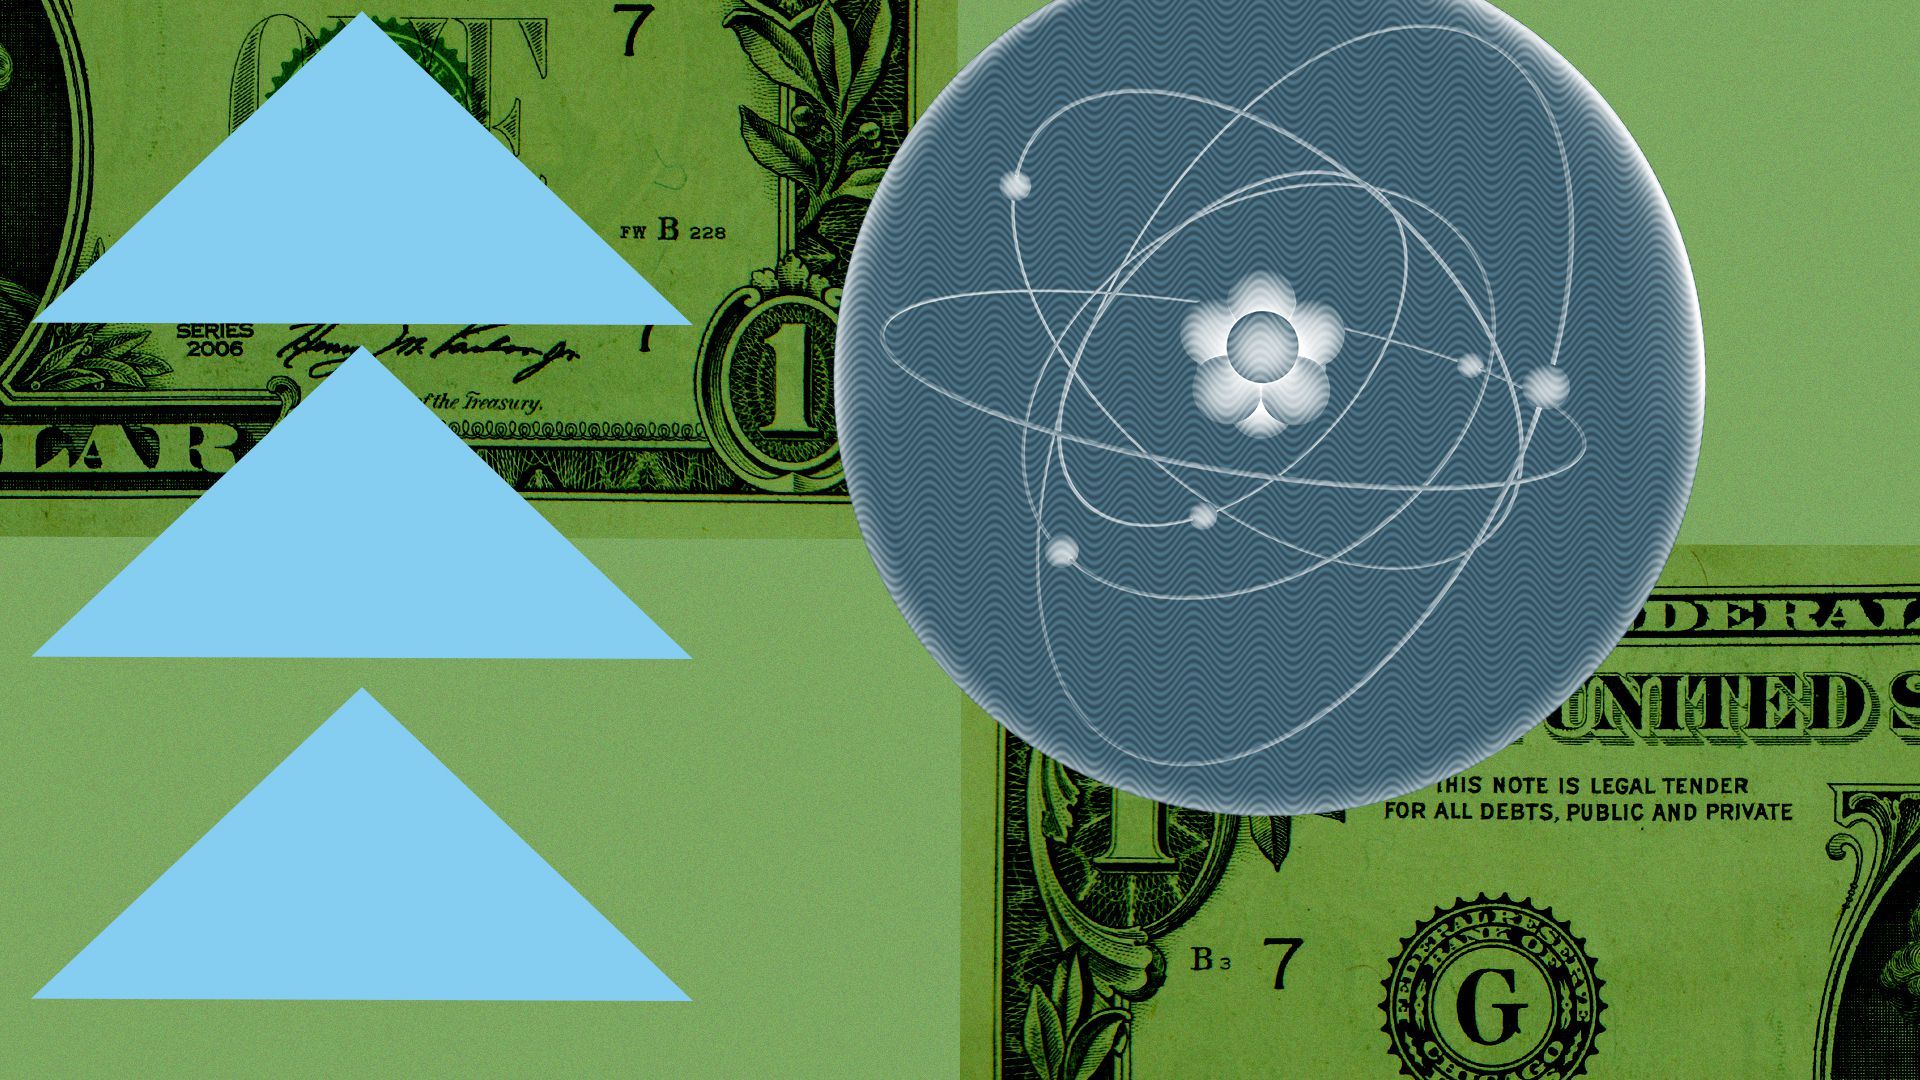 Illustration collage of an atomic structure, graphic shapes, and dollar bills